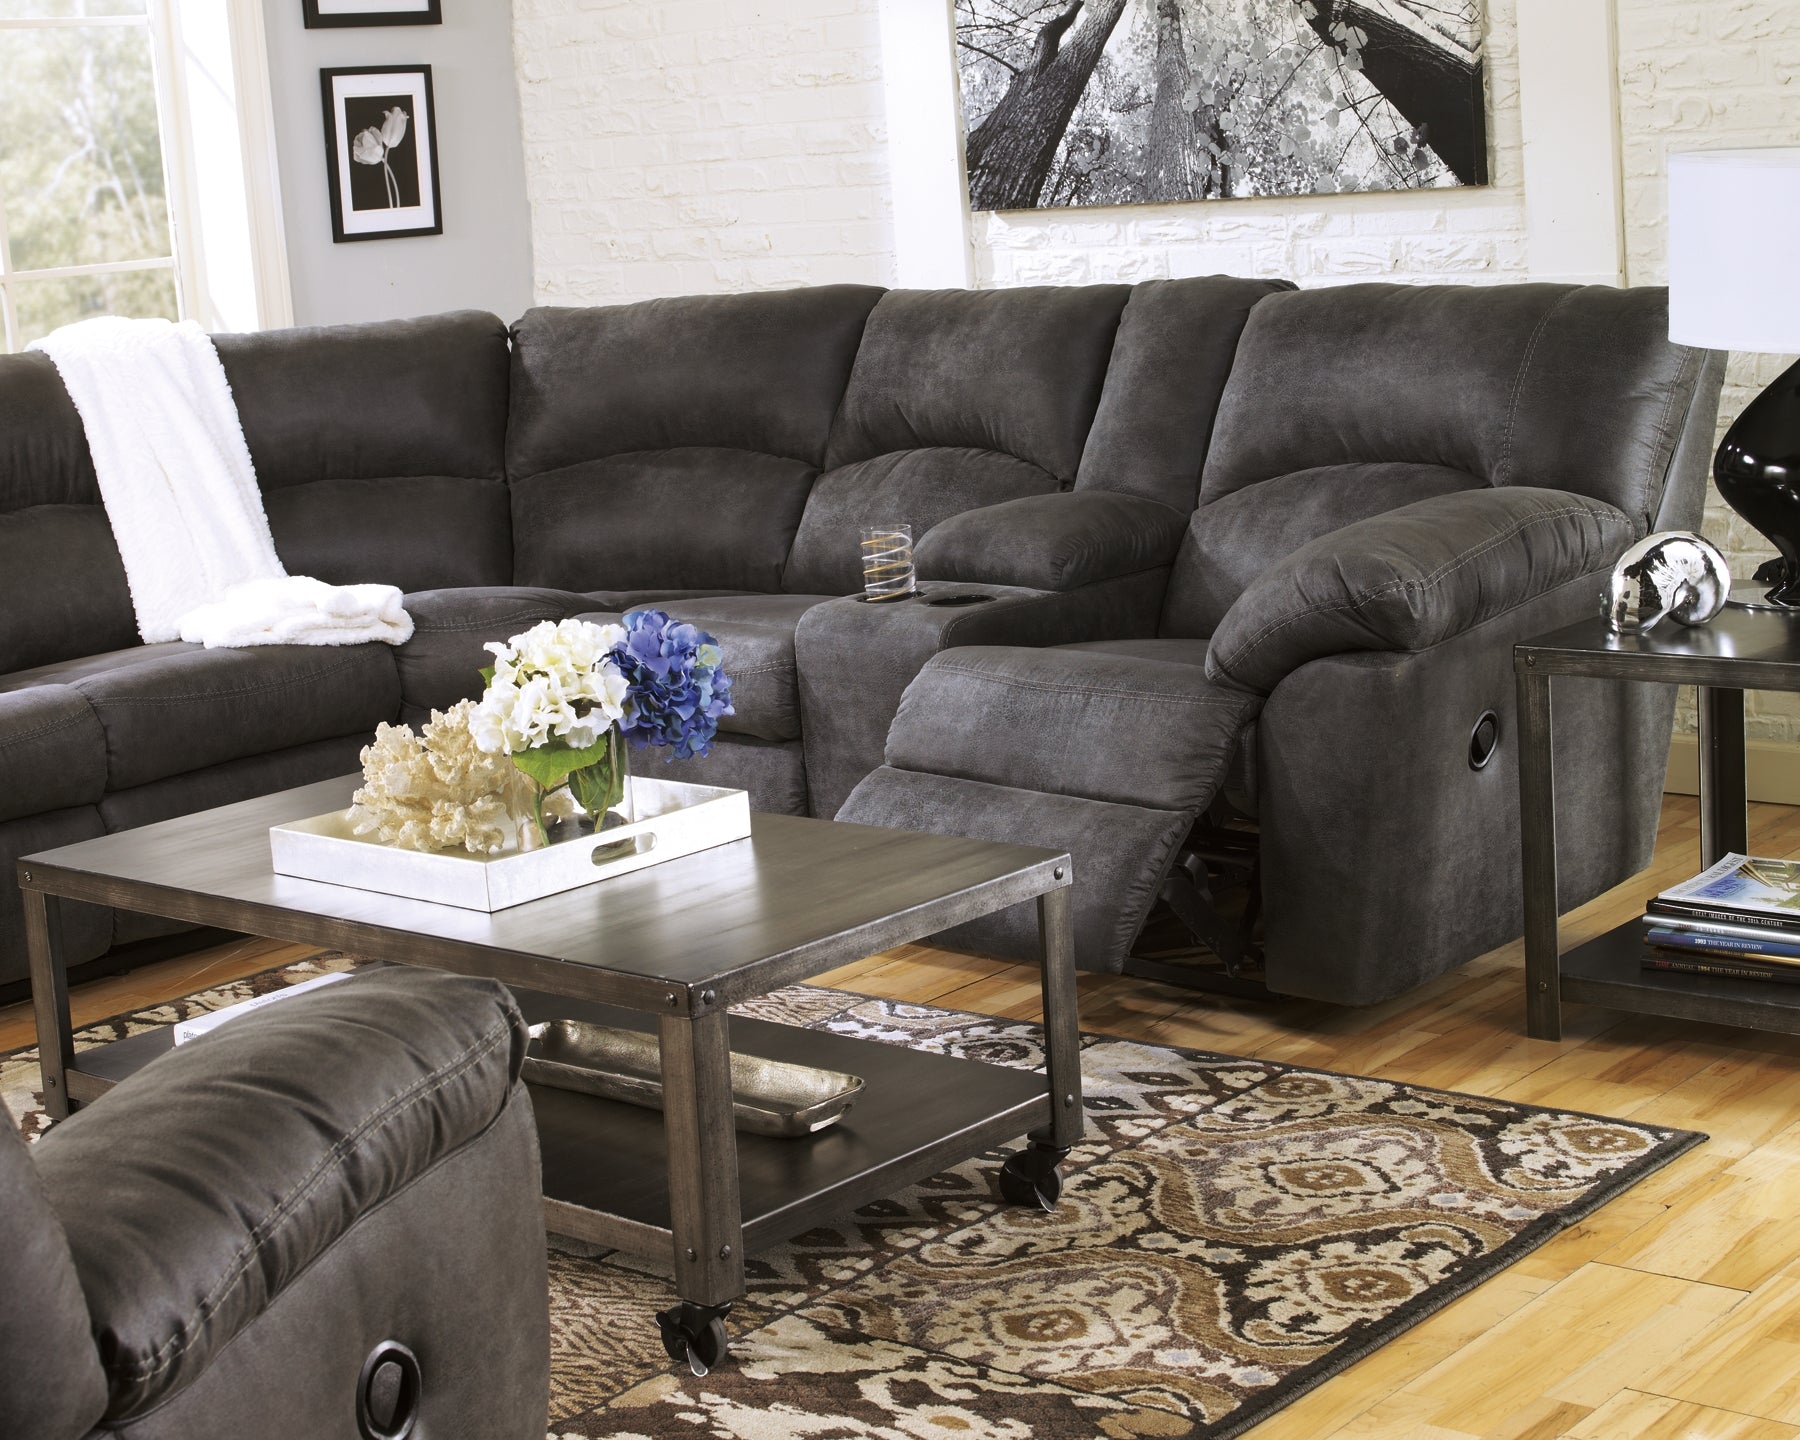 Tambo 2-Piece Reclining Sectional Signature Design by Ashley®